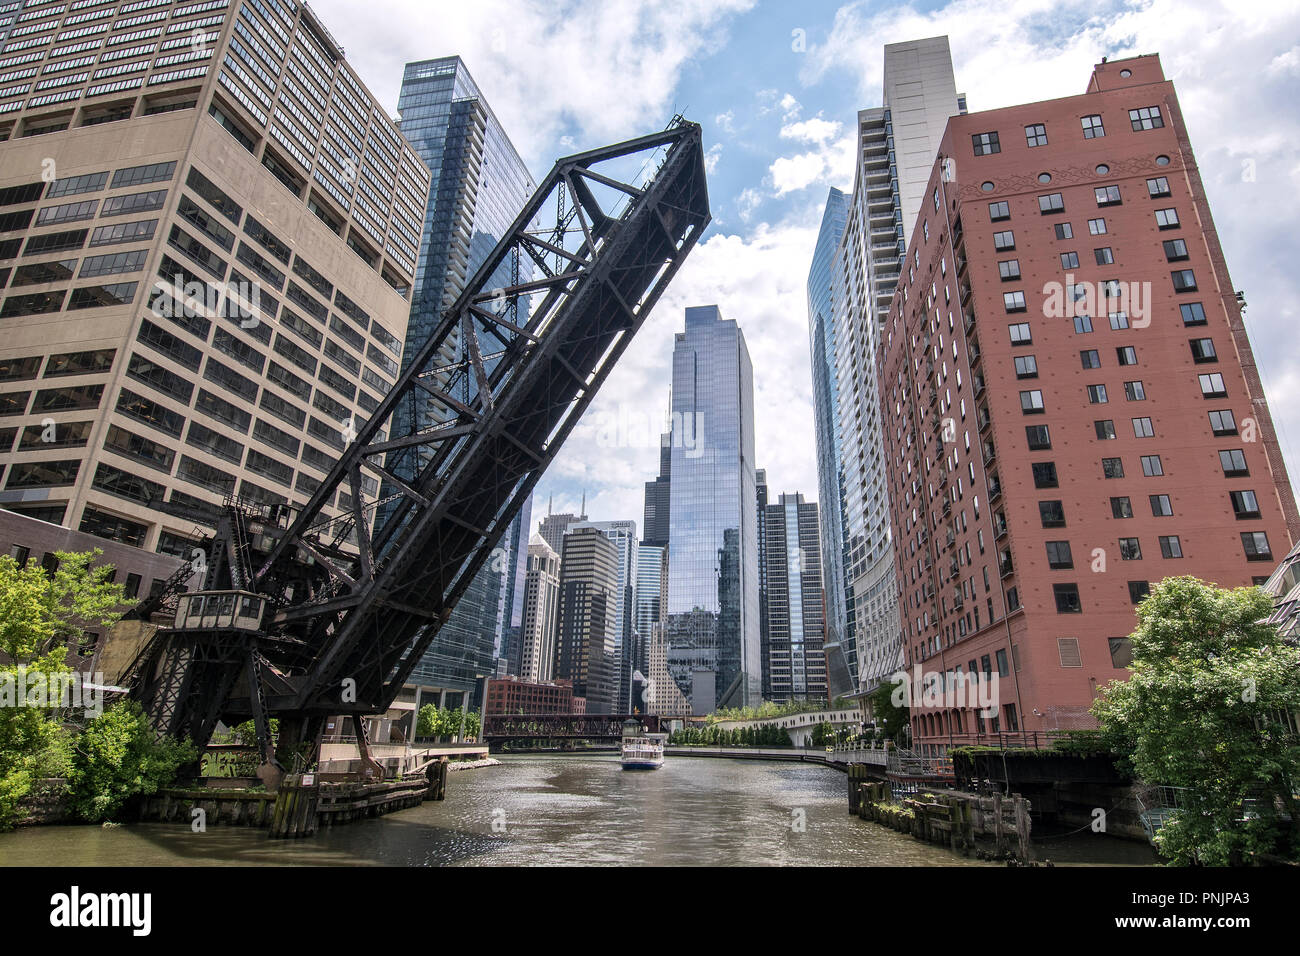 Old Chicago & Northwestern Railway Bridge over the Chicago River, Downtown Chicago, IL. Stock Photo